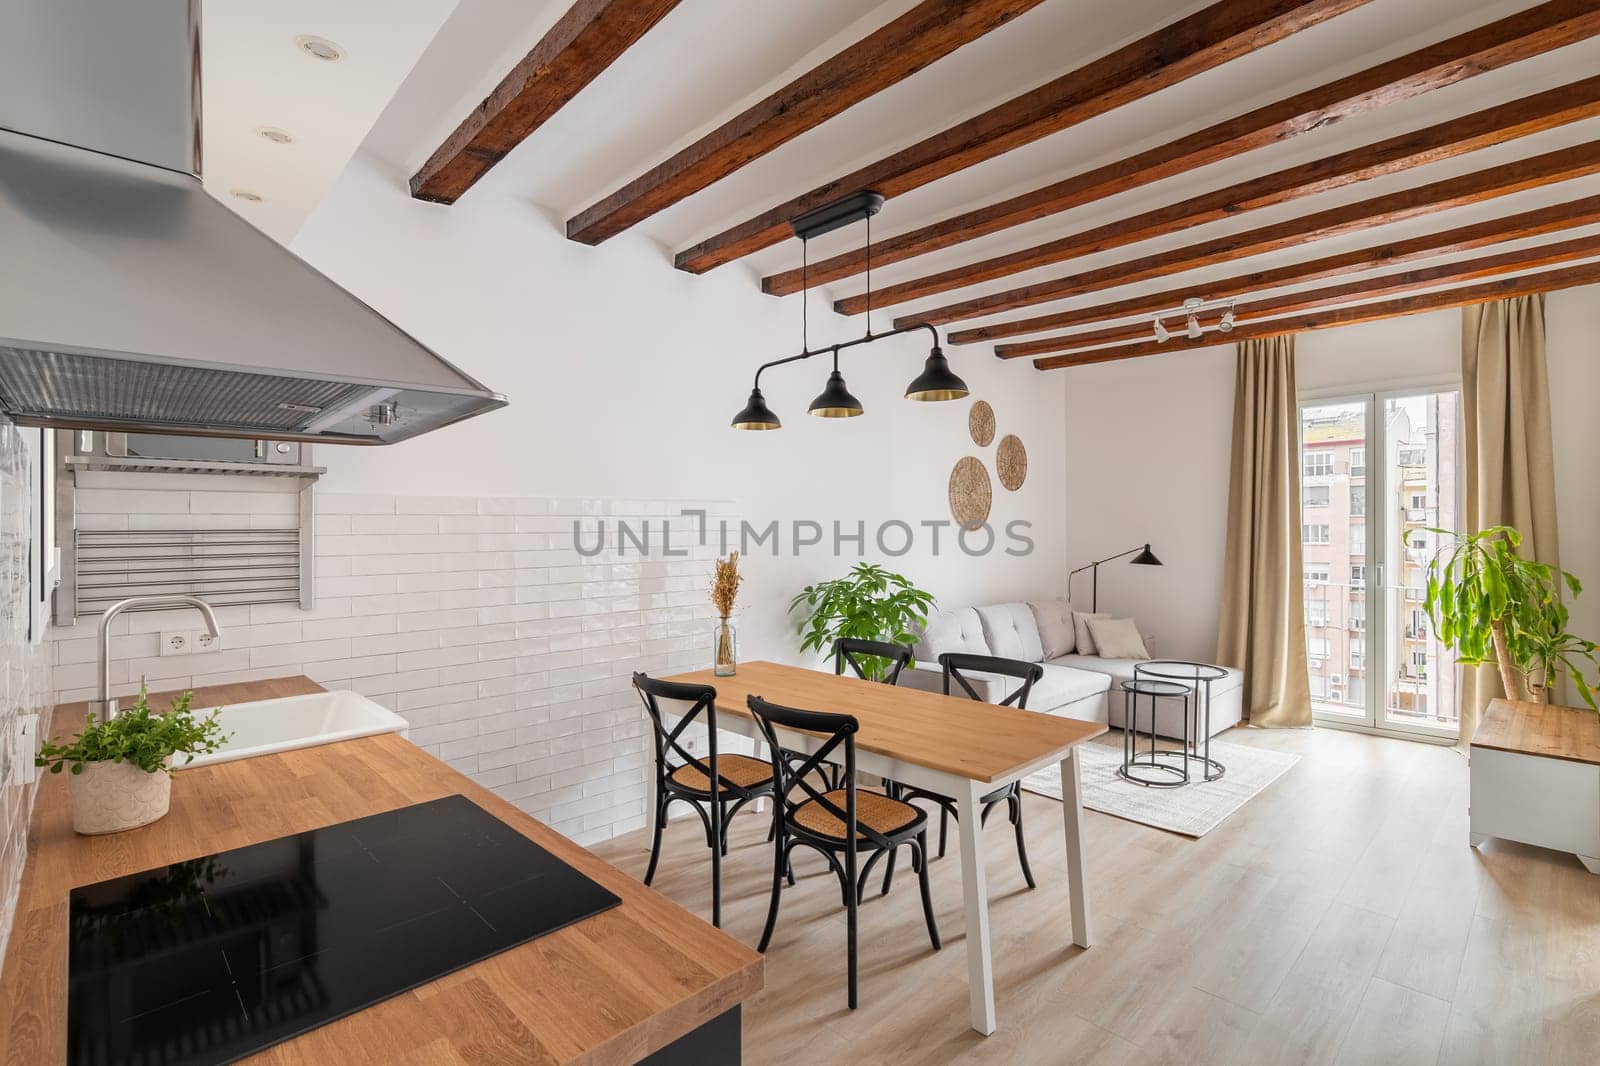 Stylish kitchen and dining area in modern studio apartment. Comfortable furniture arrangement in luxury restored flat. Residential house